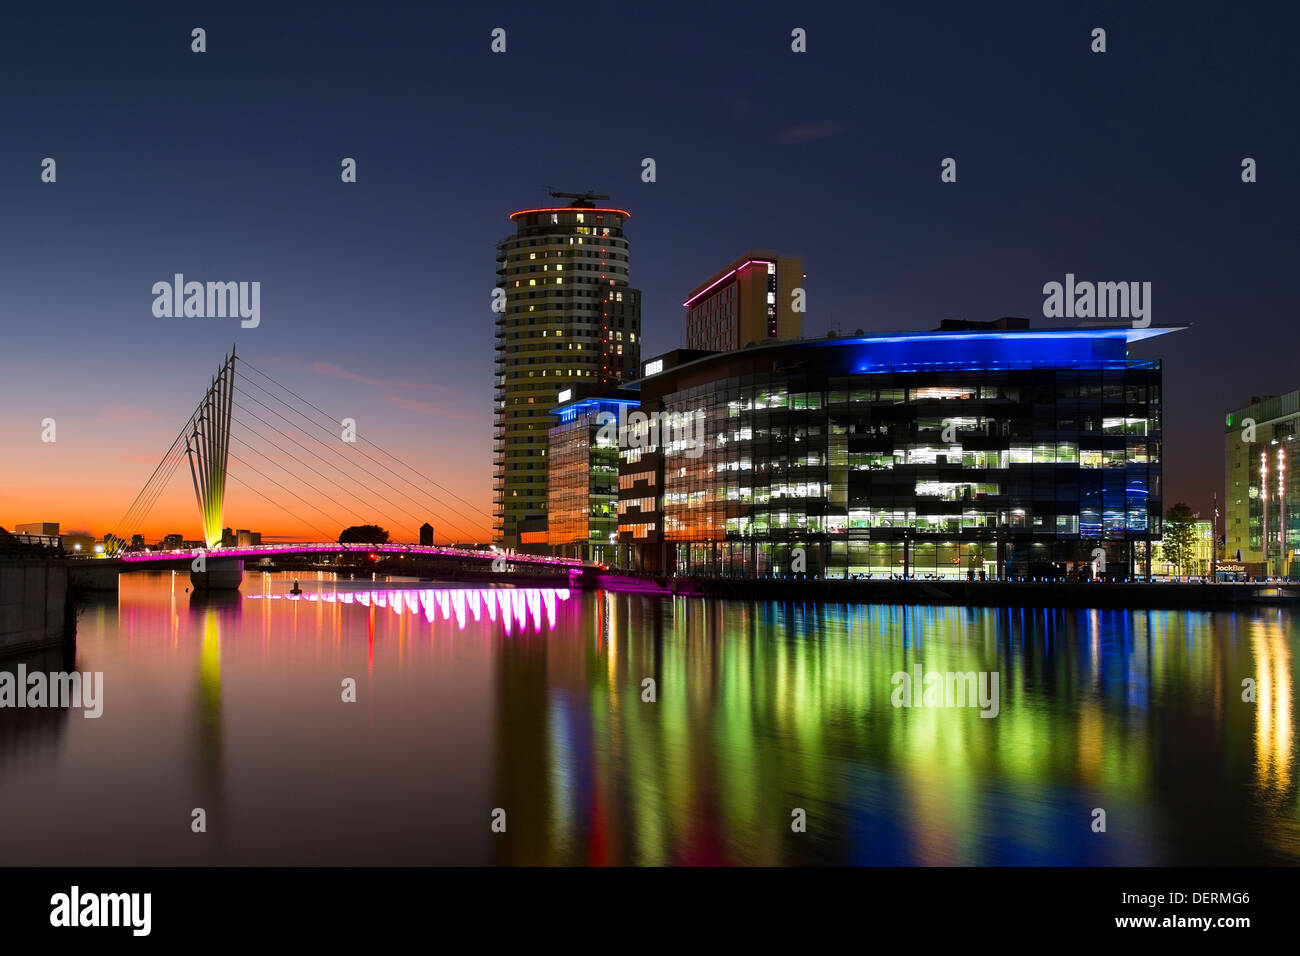 England, Greater Manchester, Salford Quays, Media City illuminated at sunset Stock Photo